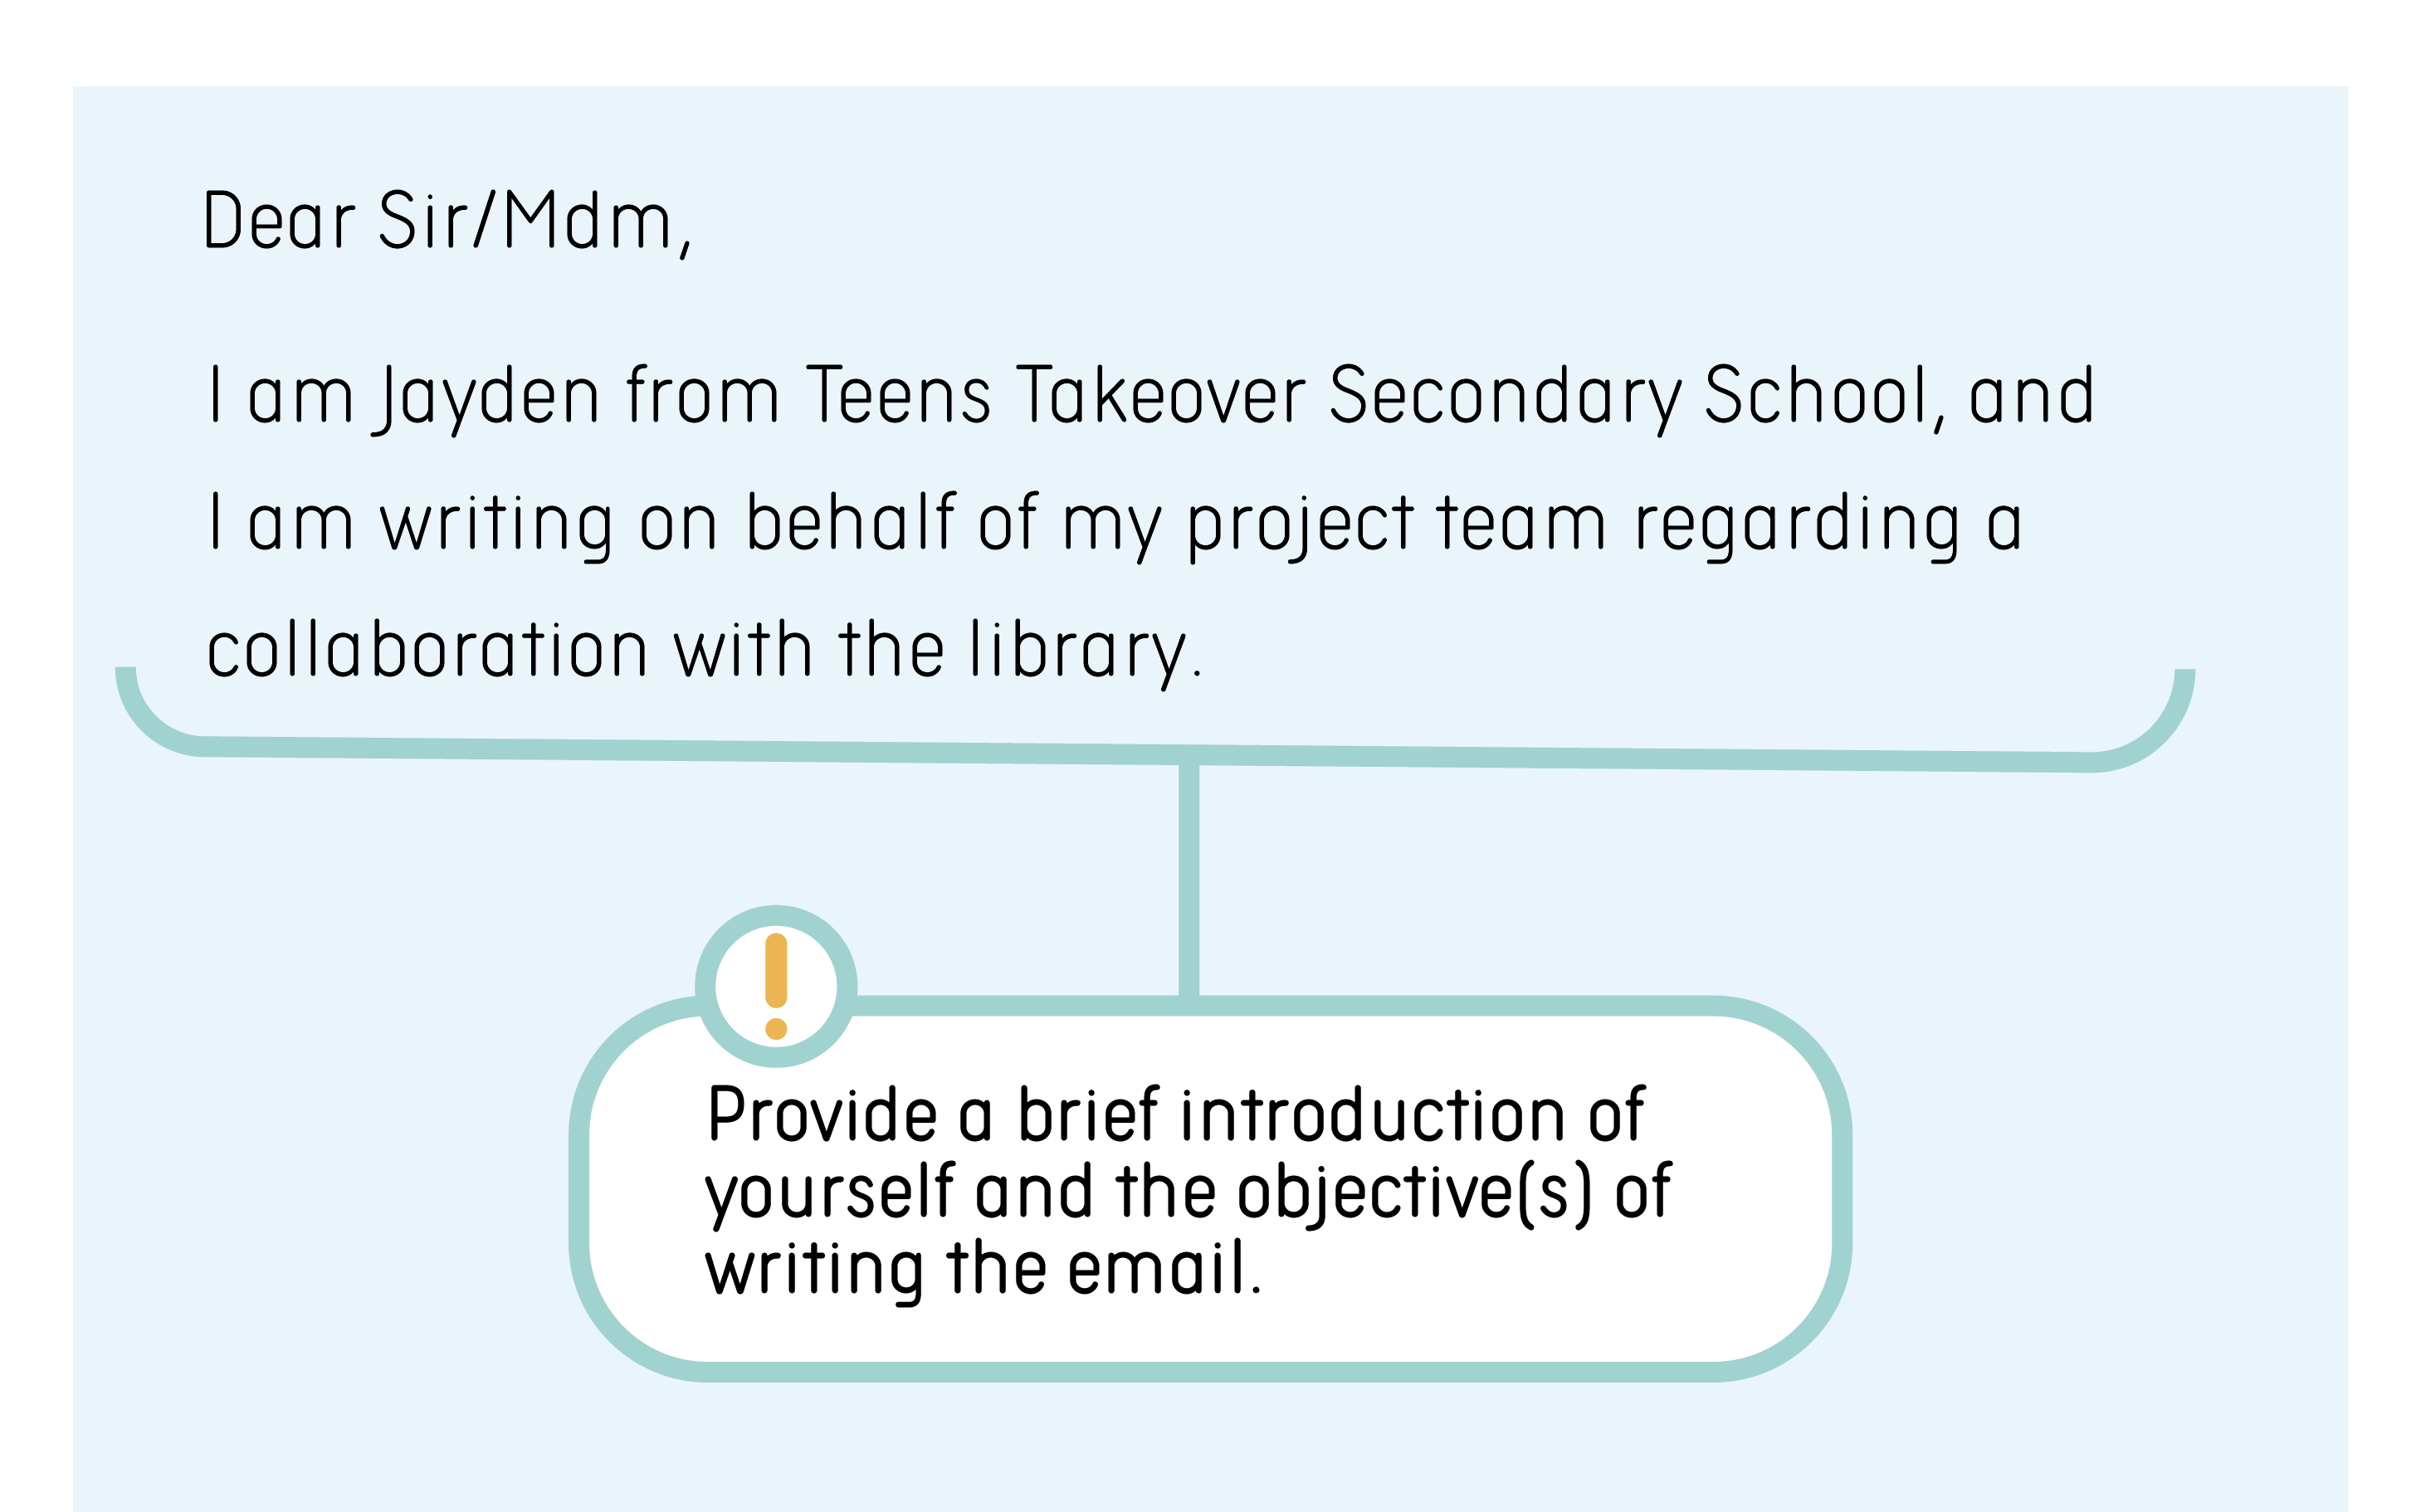 Tips: Provide a brief introduction about yourself and the objective(s) of writing the email. Example: I am Jayden from Teens Takeover Secondary School, and I am writing on behalf of my project team regarding a collaboration with the library.